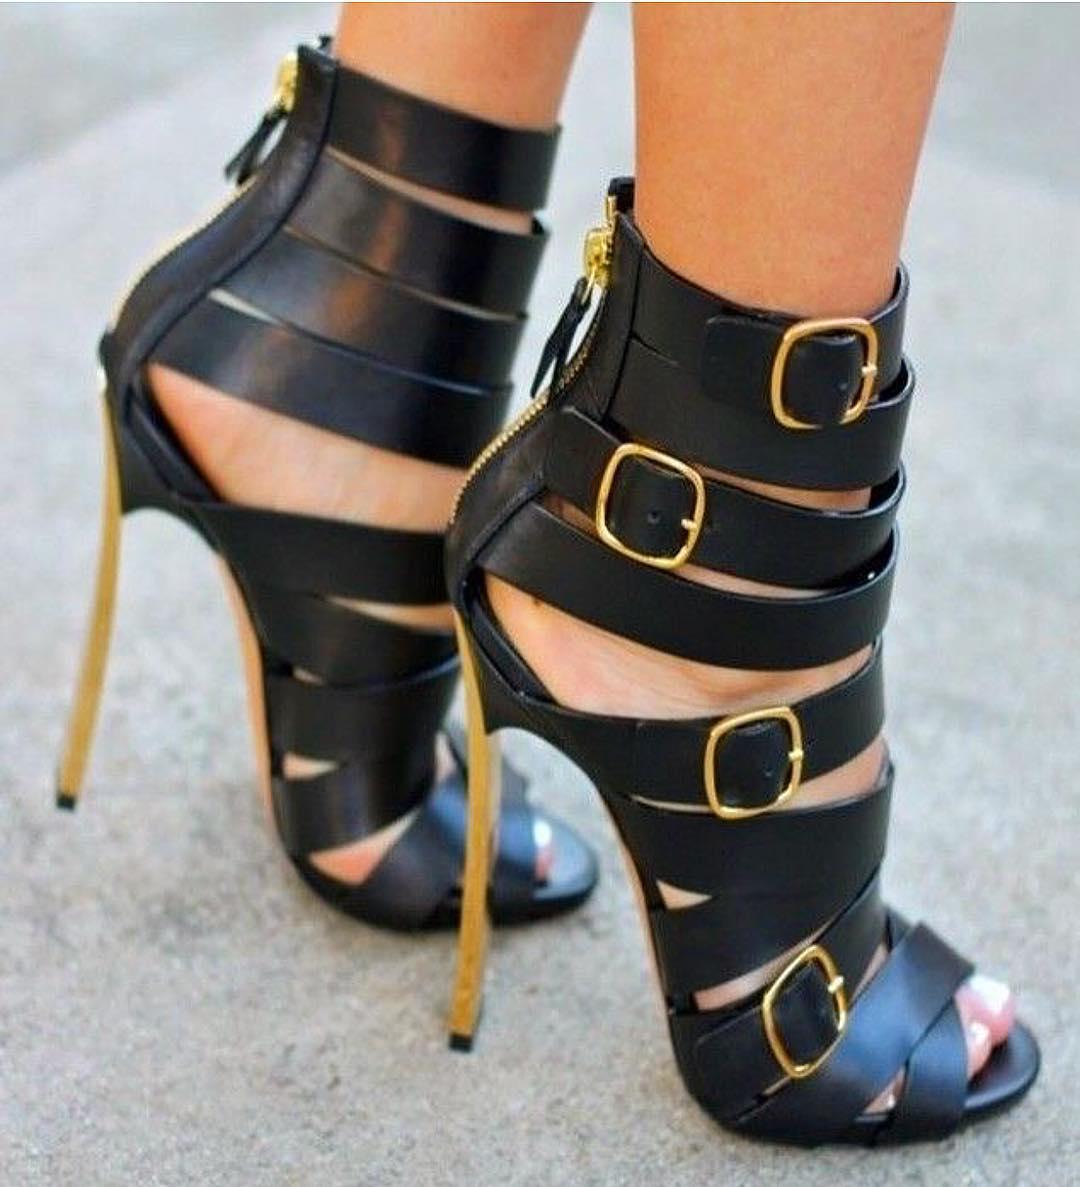 Latest collection of stylish girls high heels shoes